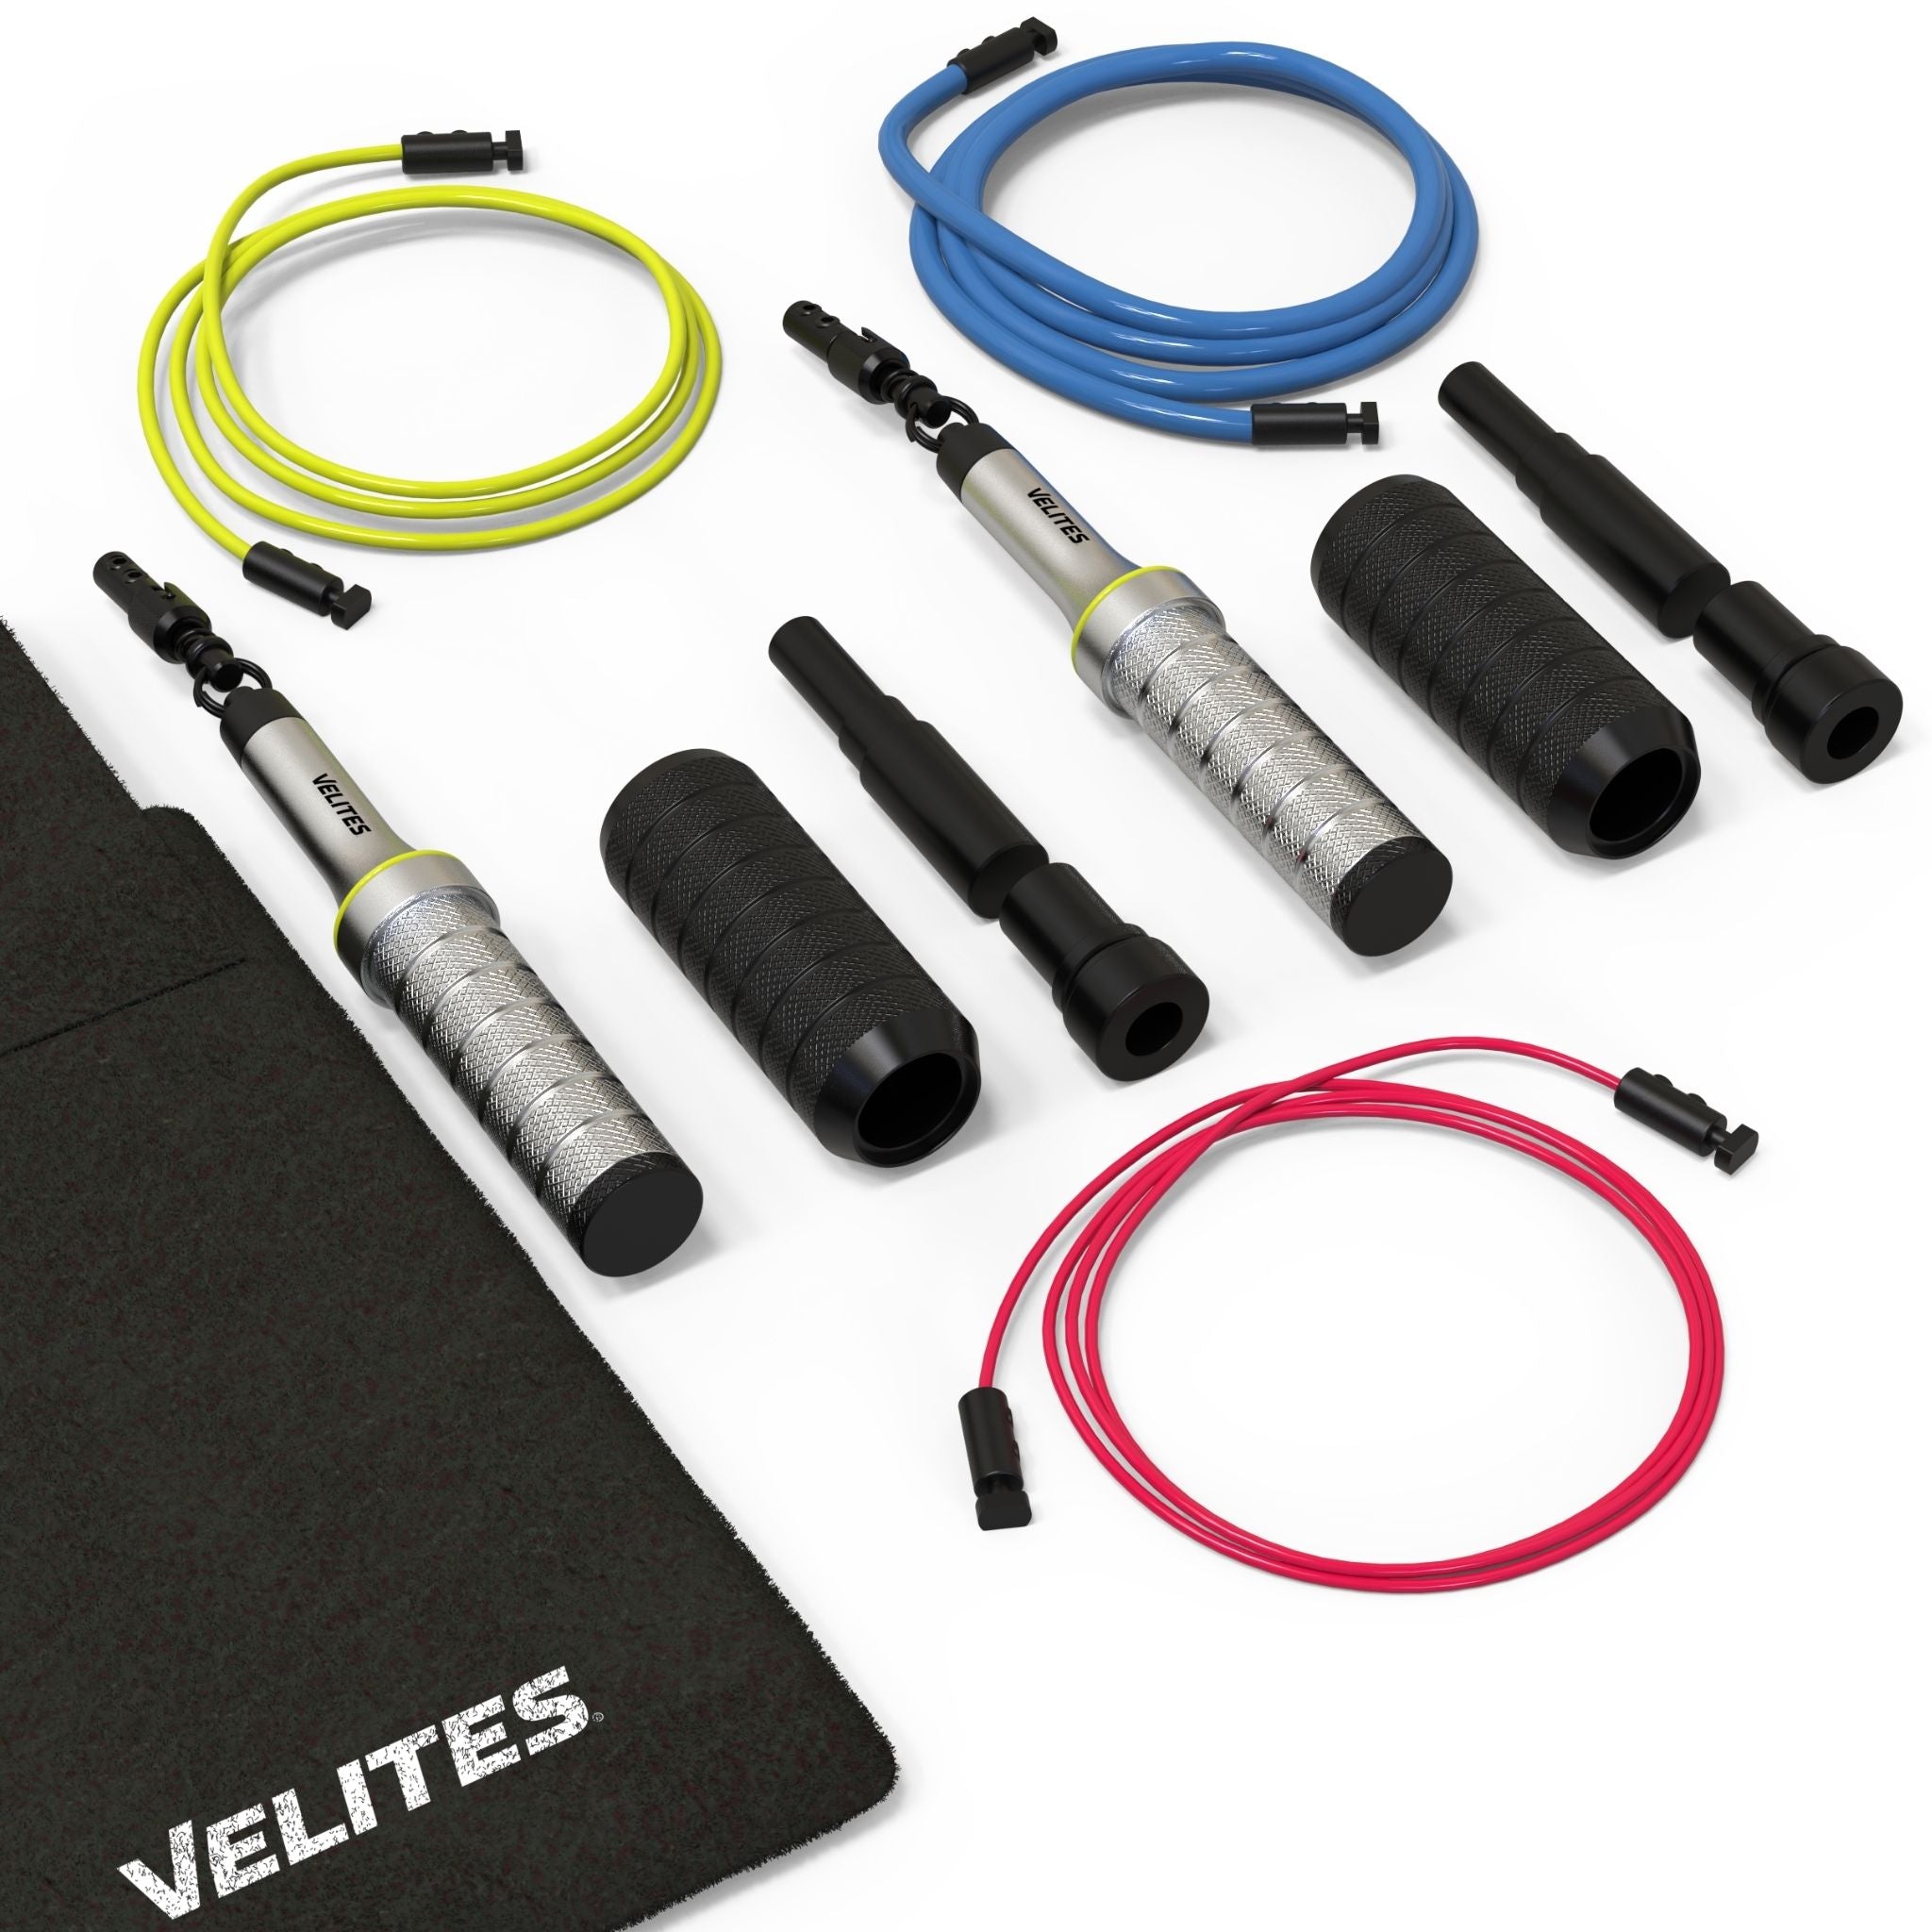 Pack Comba Earth 2.0 Velites + Lastres + Cables - plateado - 